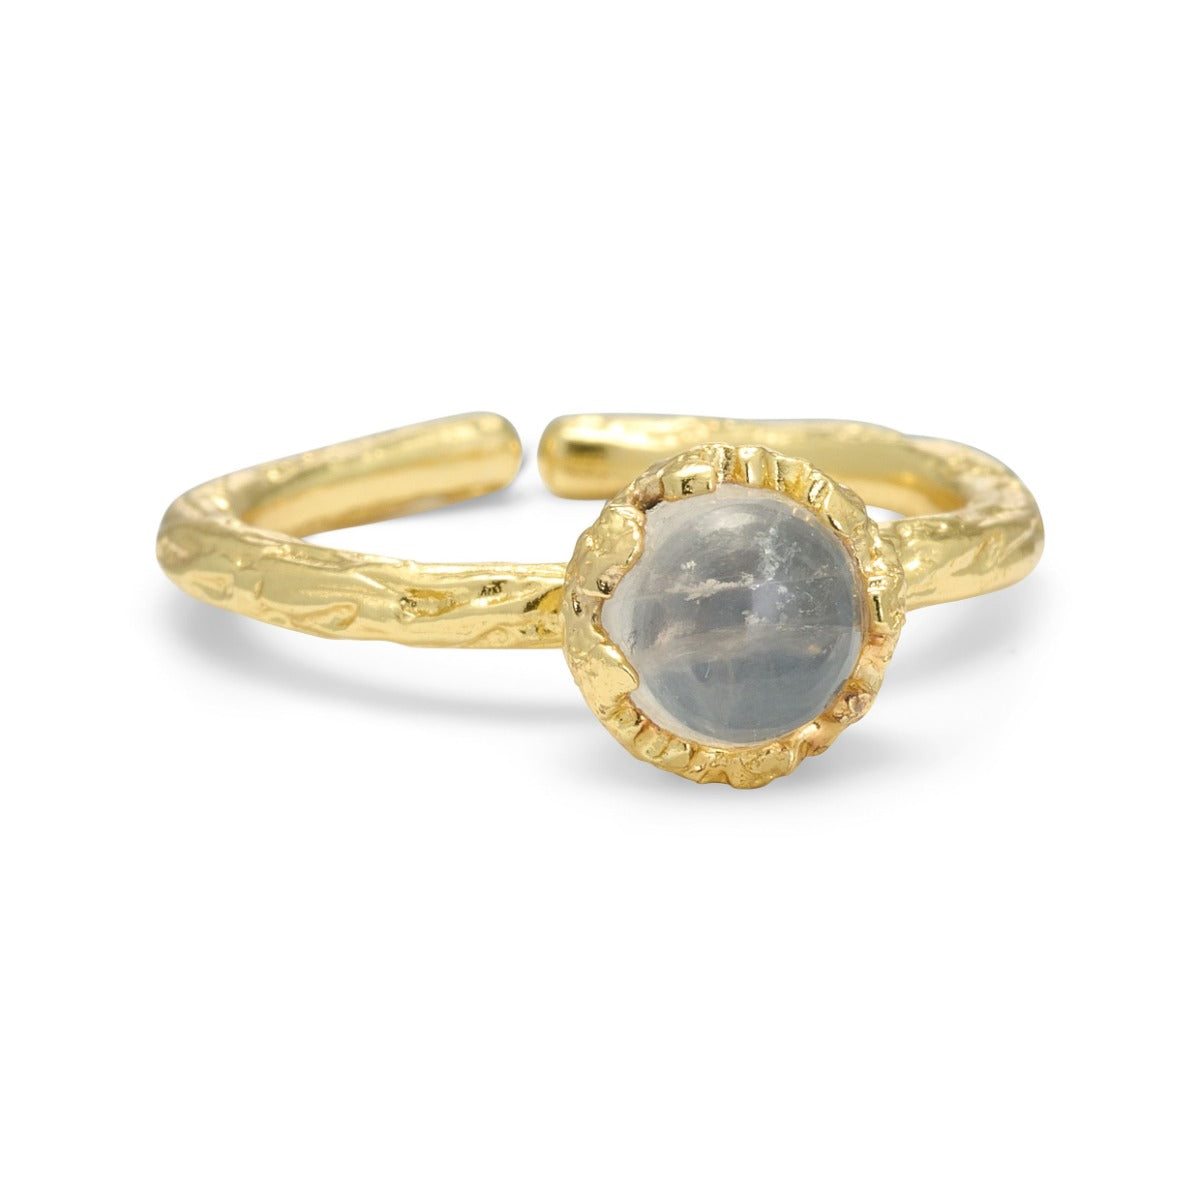 Pure by nat small ring with nature stone